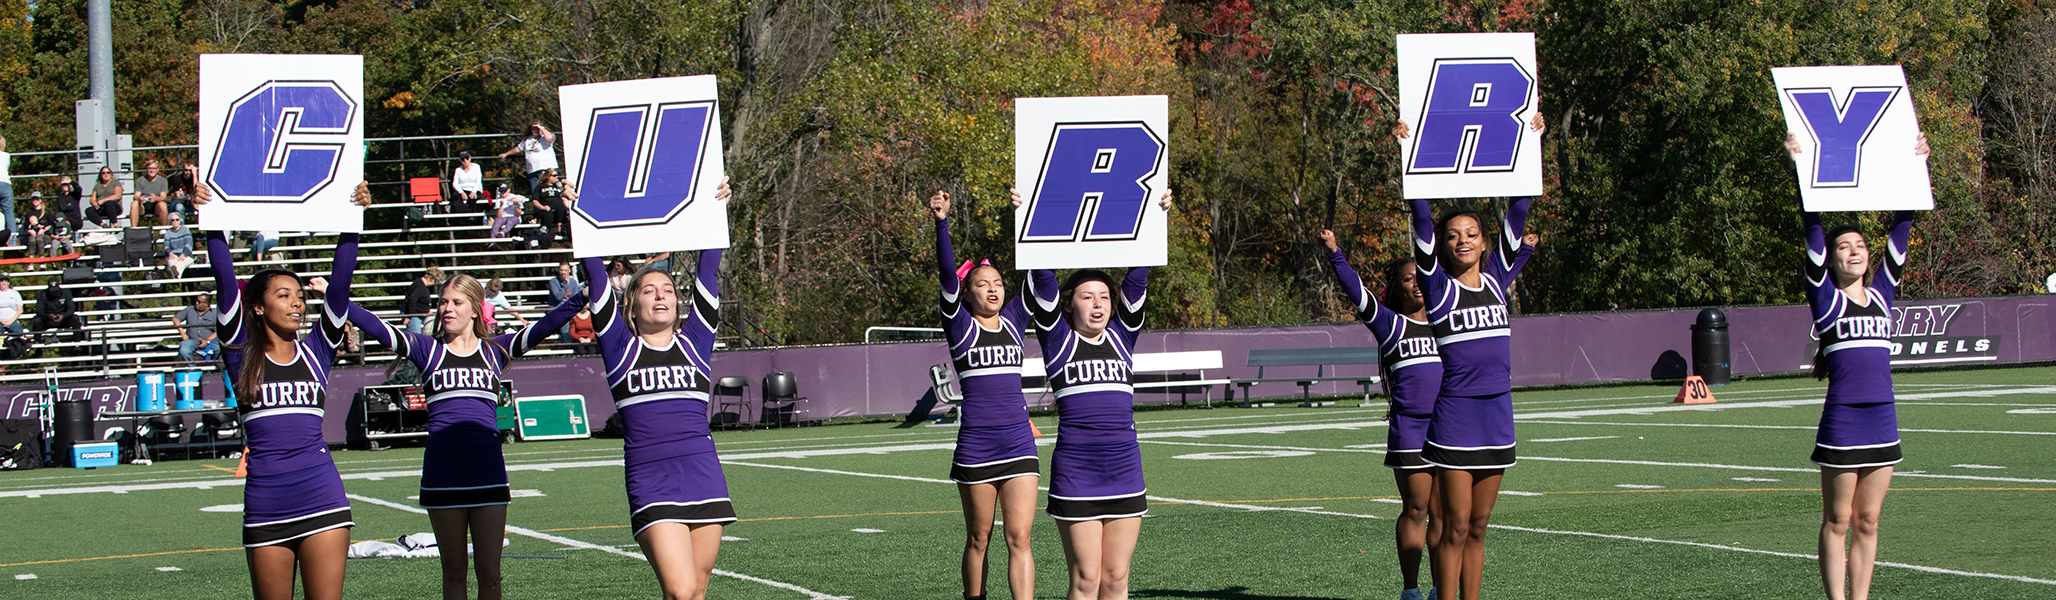 Curry College cheerleaders hold up "Curry" letters at Katz Field during Homecoming and Family Weekend